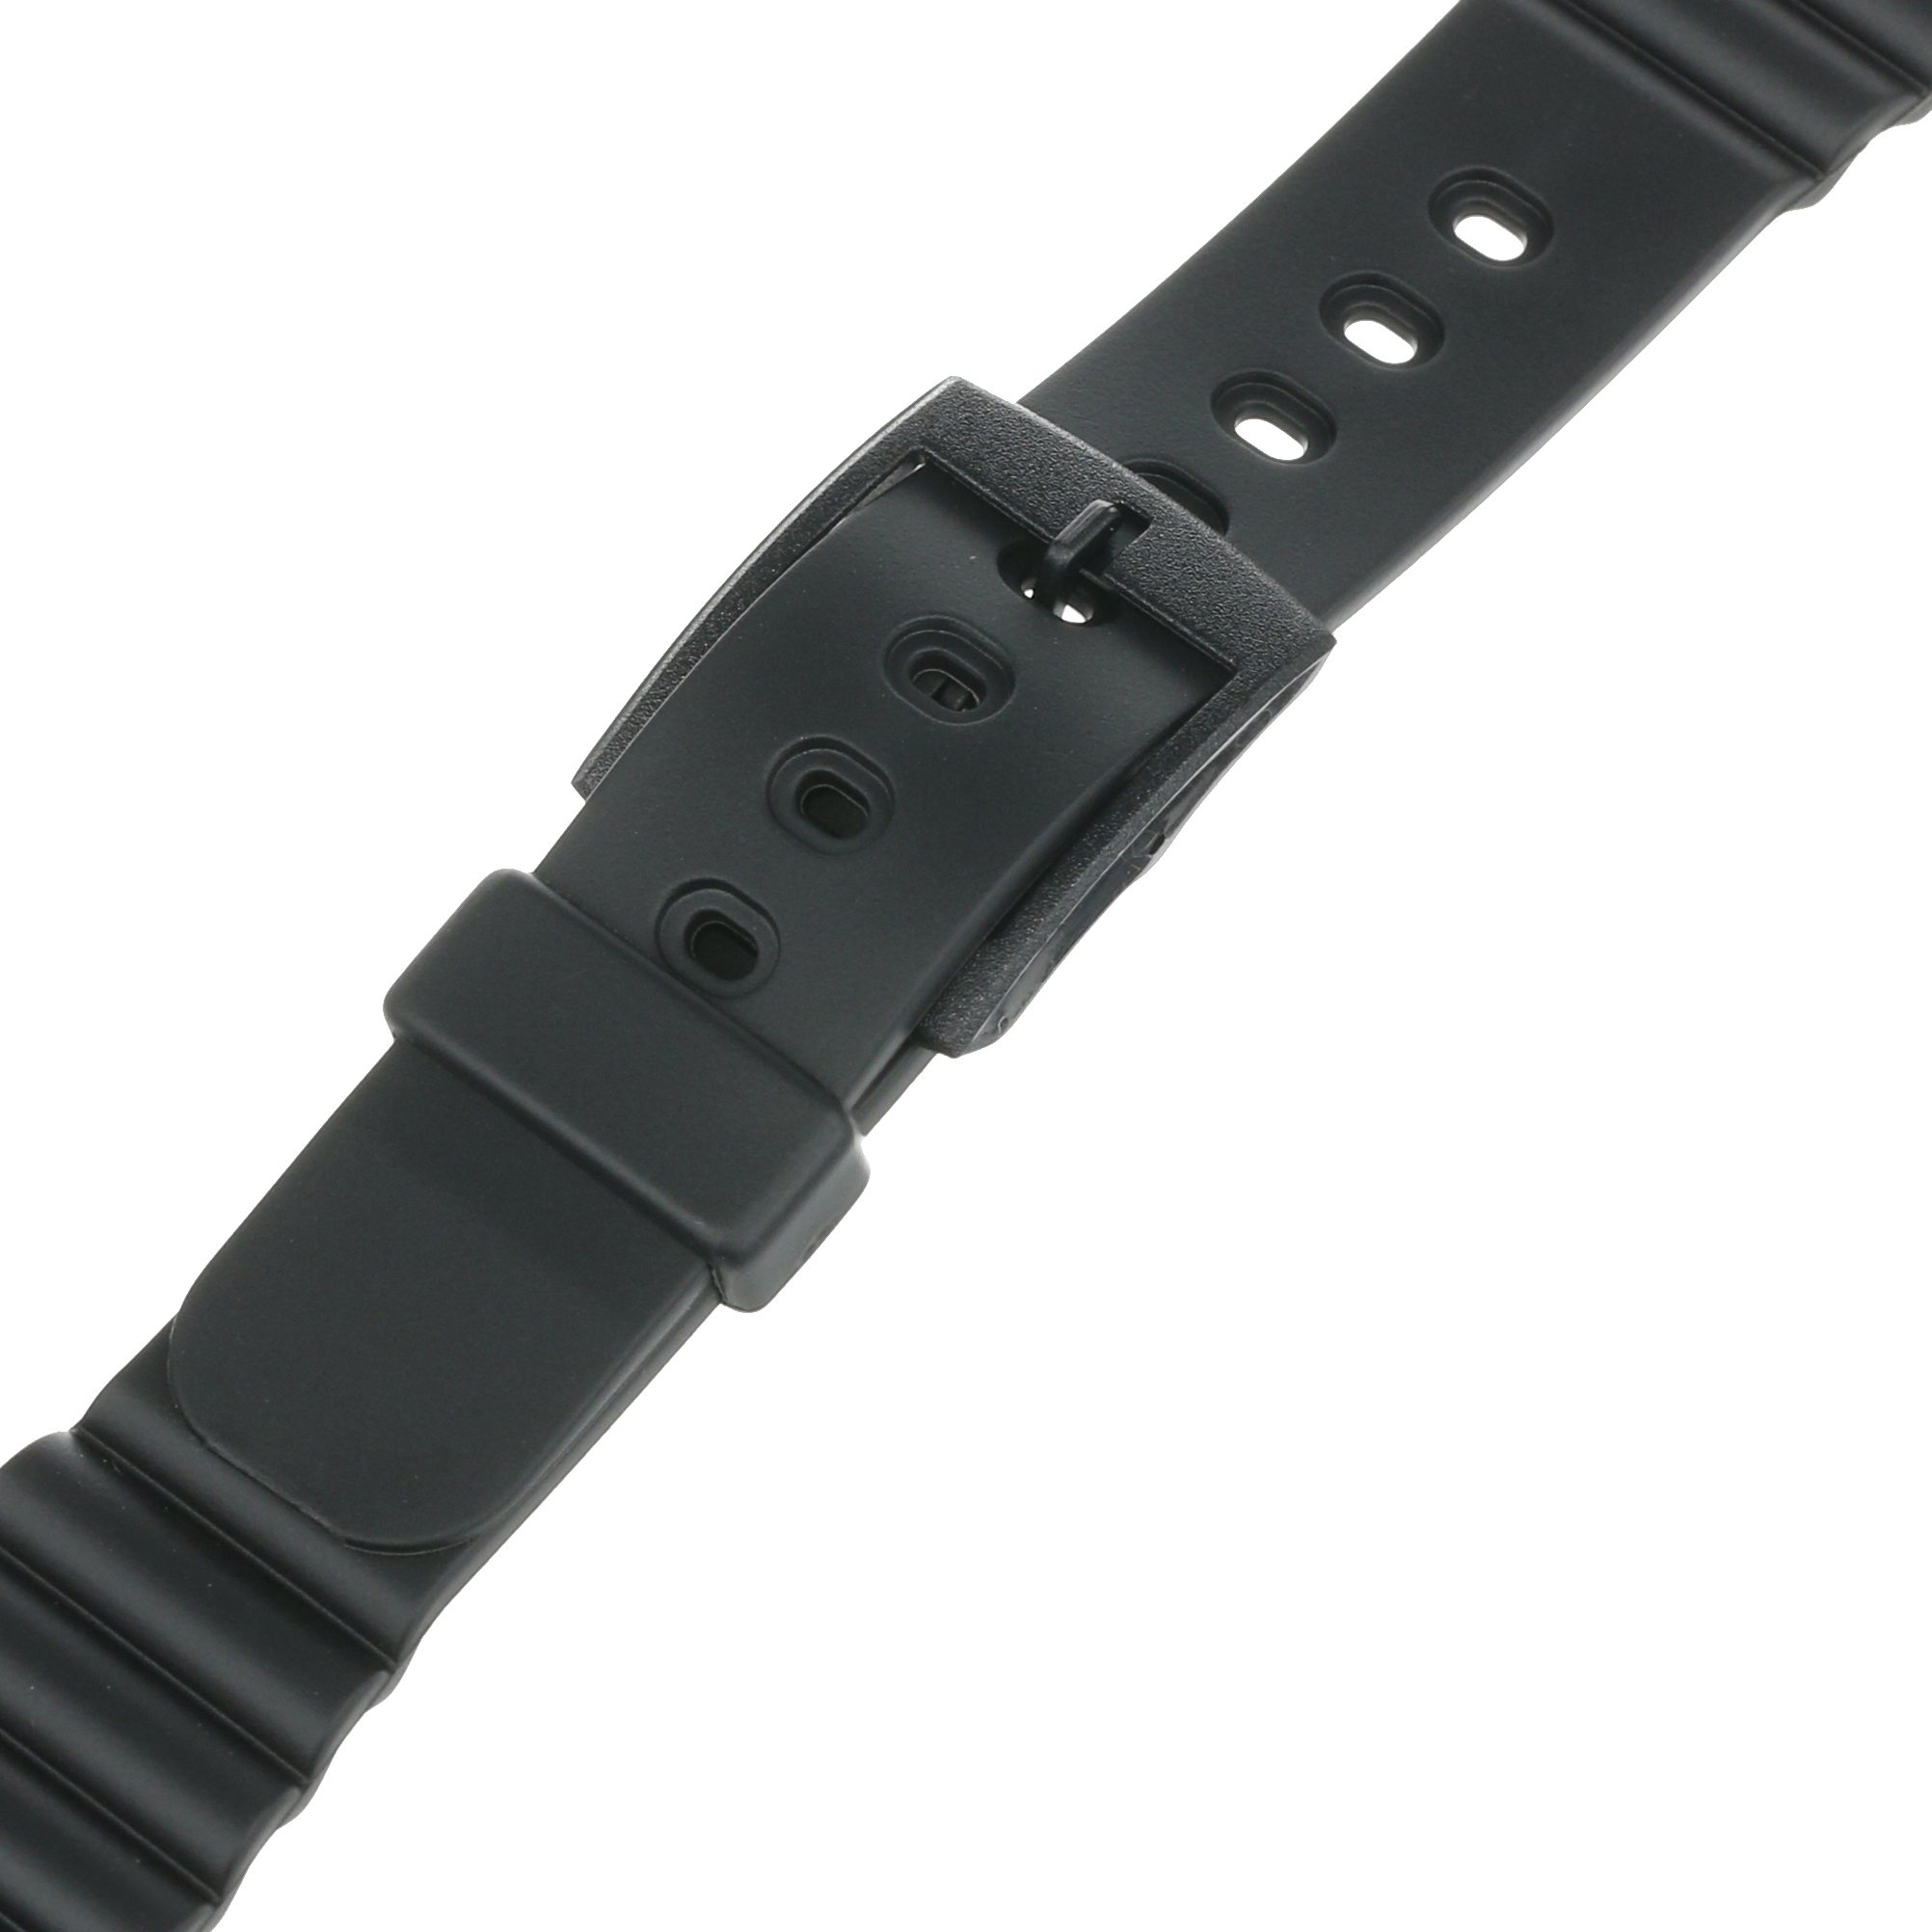 Voguestrap TX1840 Allstrap 18mm Black Regular-Length Fits Casio and Other Sport Watchband